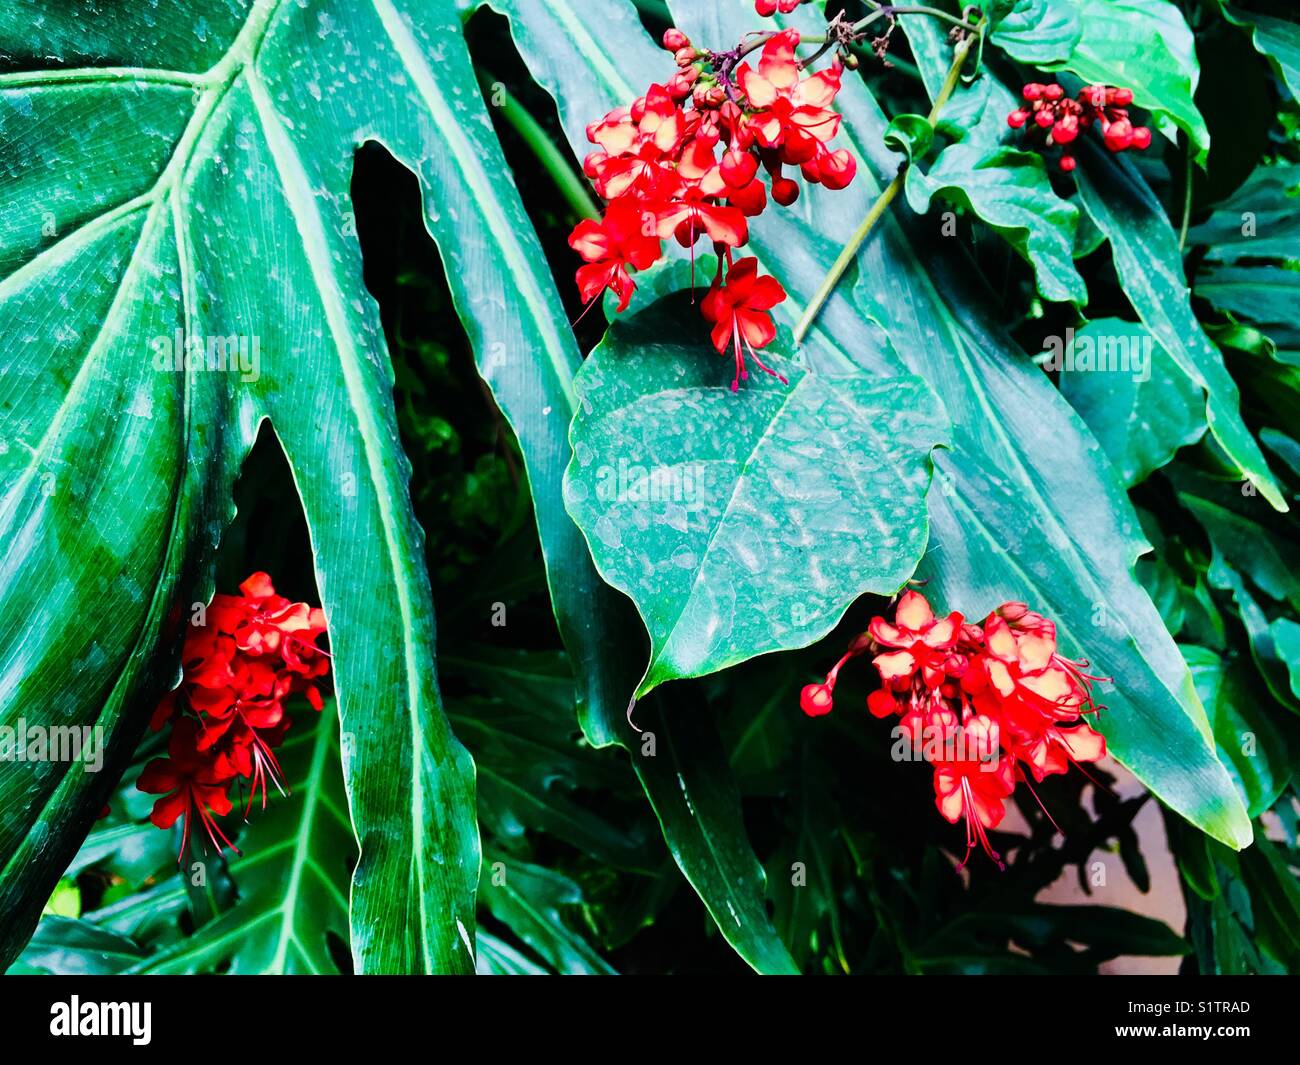 Red flowers against big green leaves Stock Photo